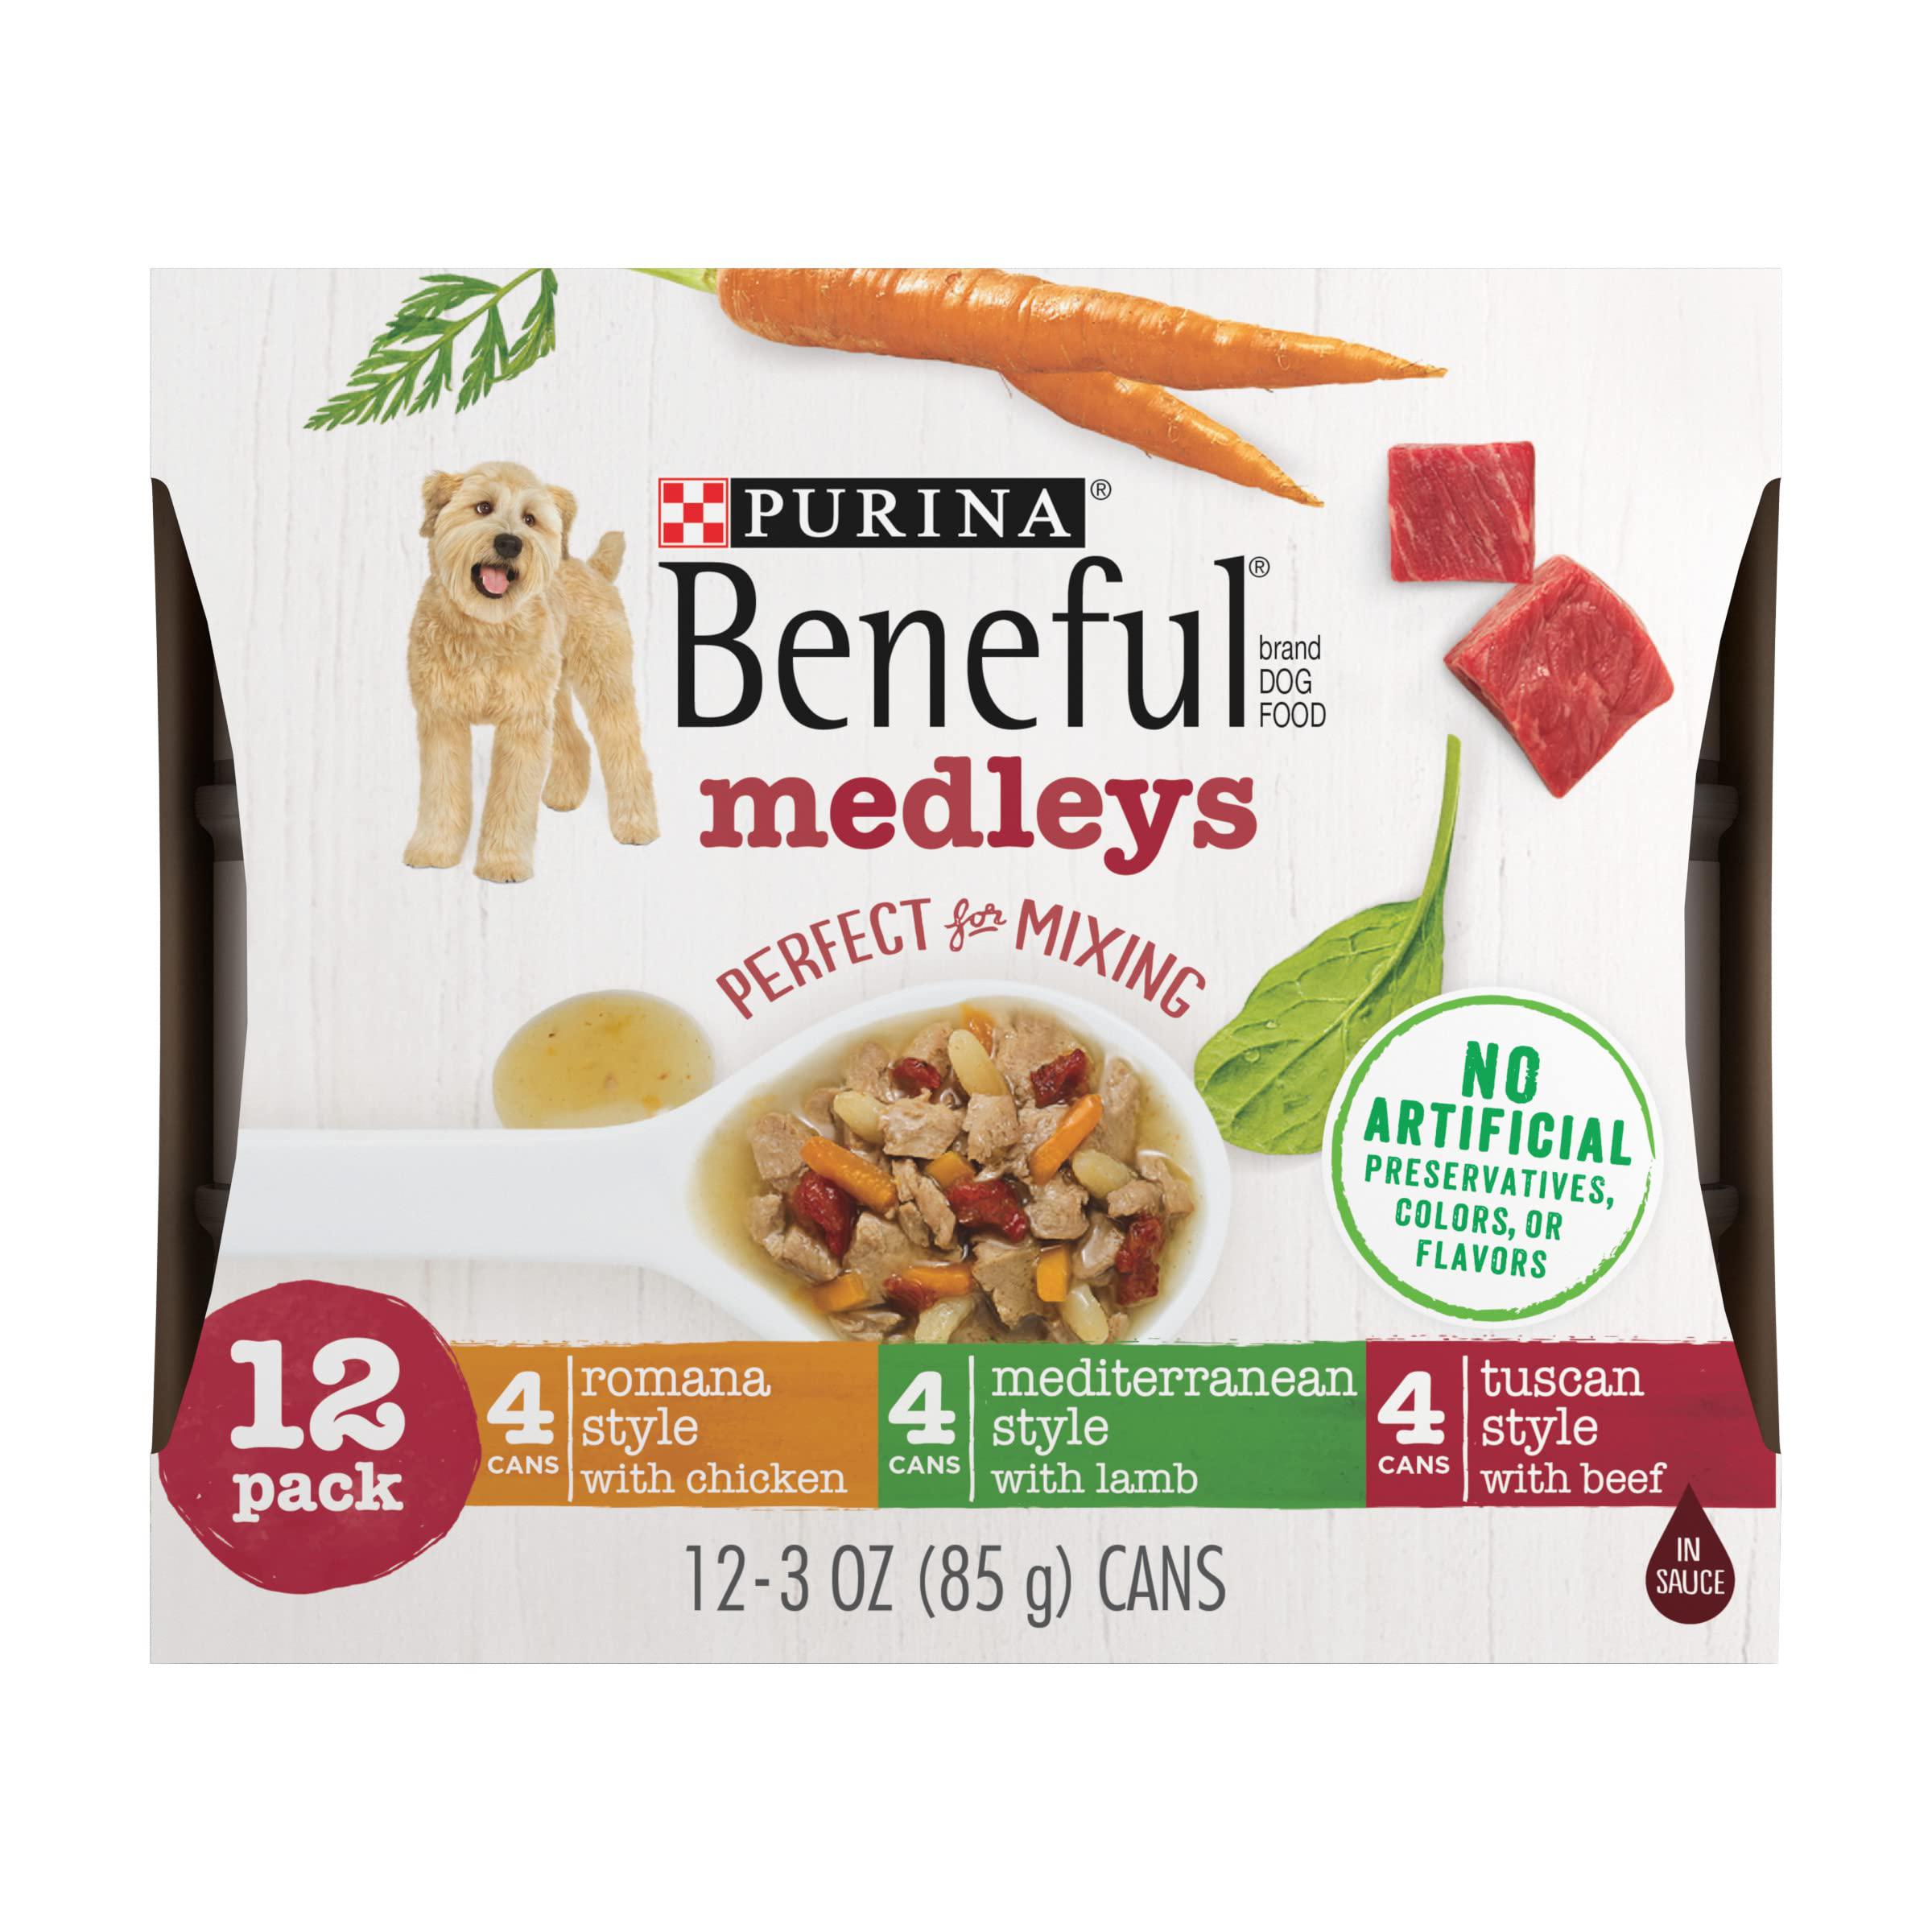 Beneful purina beneful wet dog food variety pack, medleys tuscan, romana & mediterranean style - (2 packs of 12) 3 oz. cans